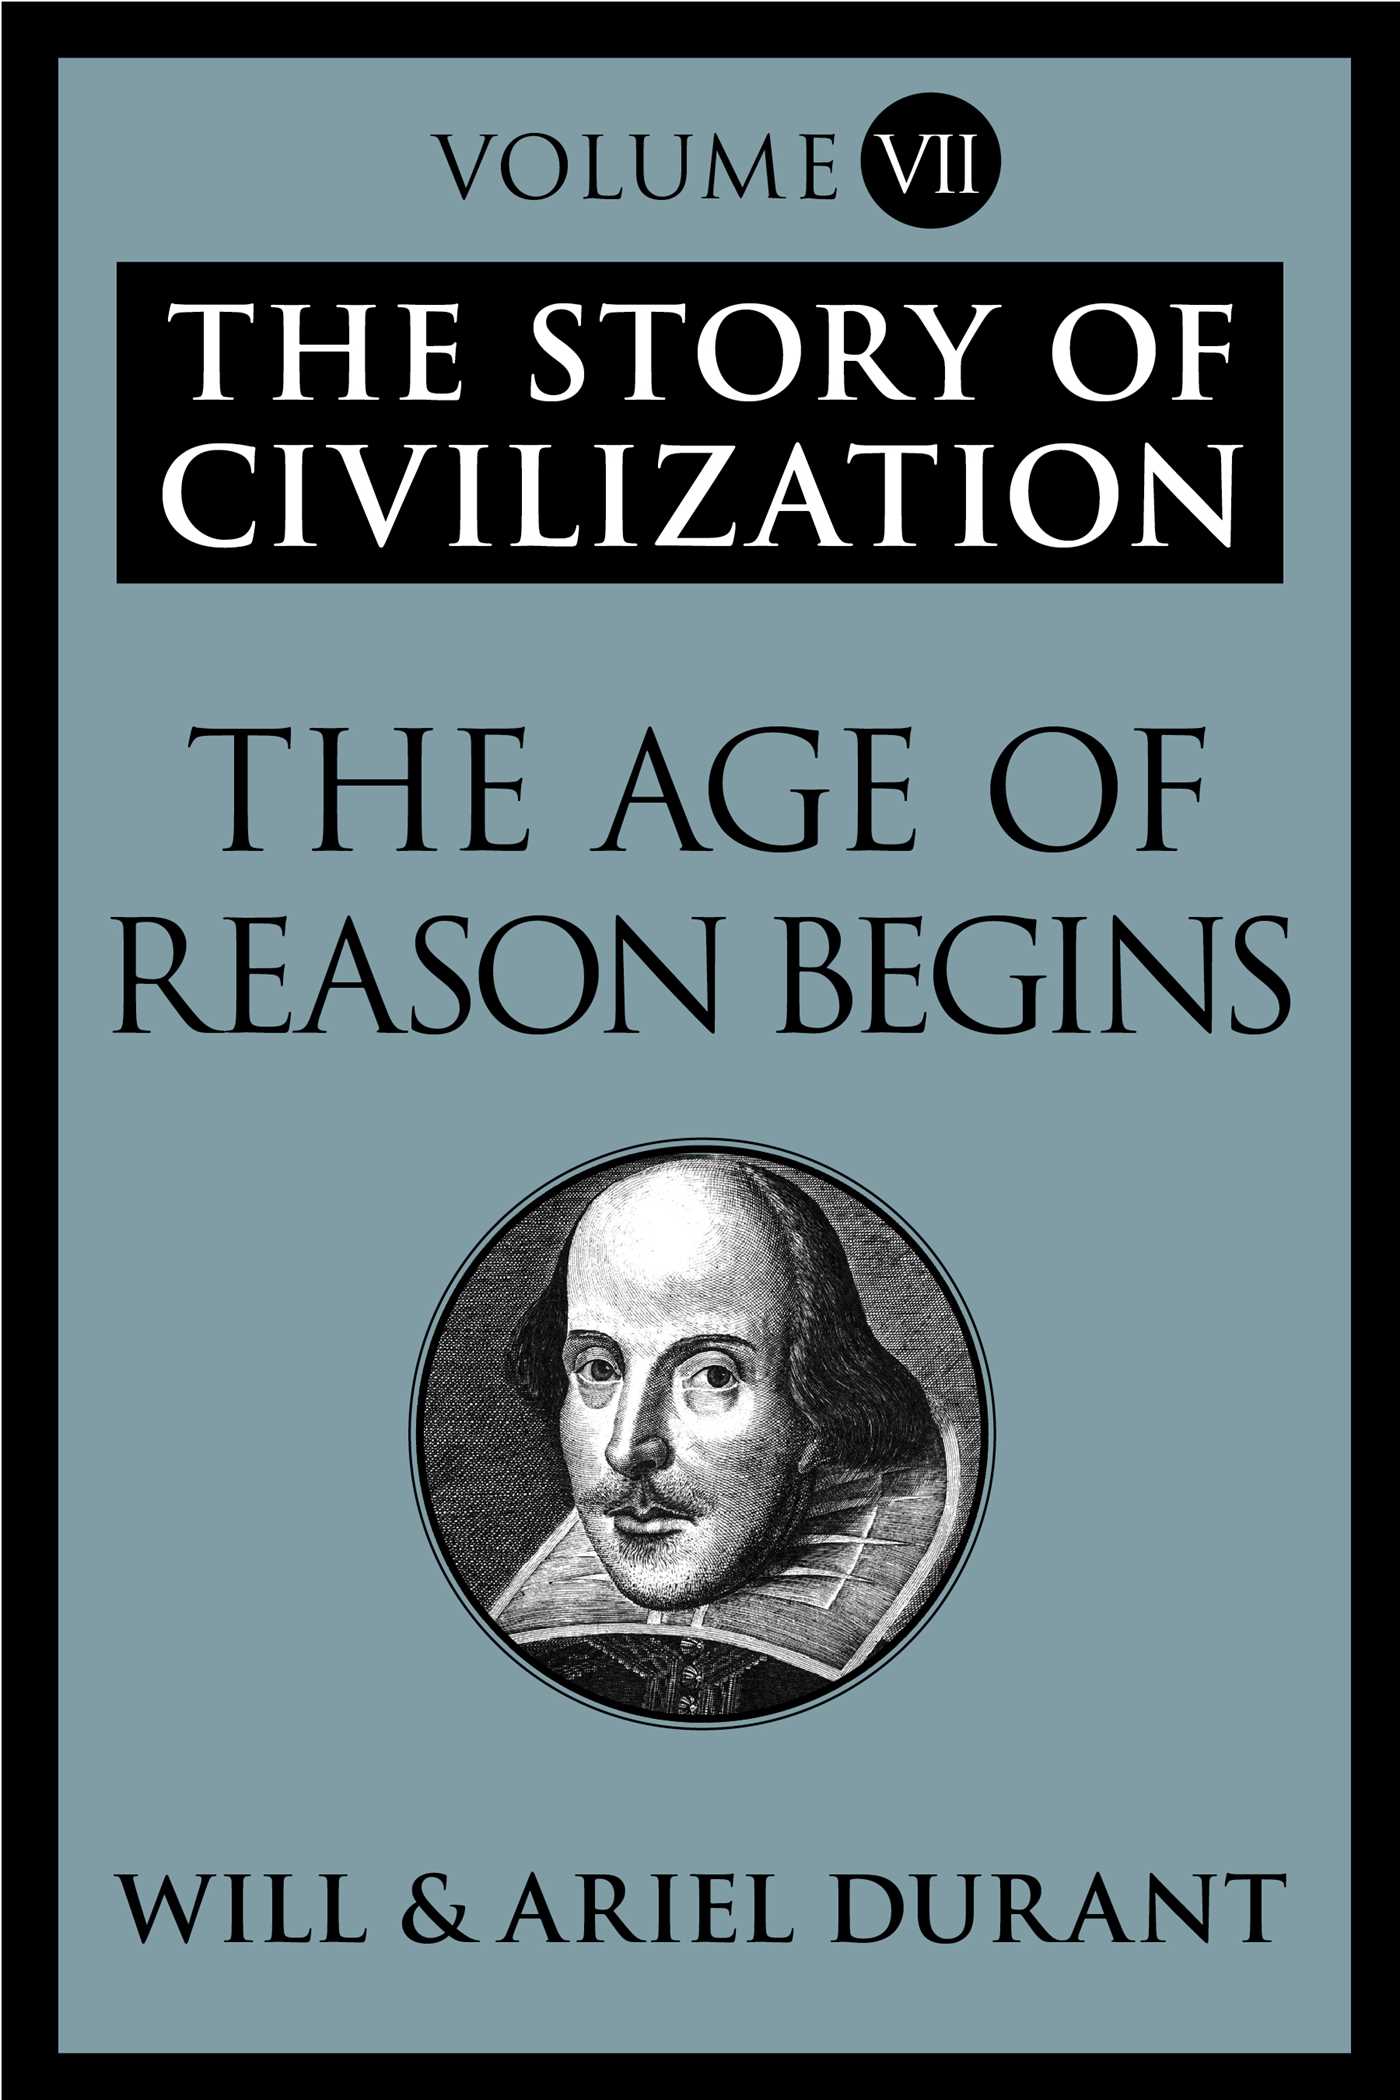 The Age of Reason Begins - 10-14.99